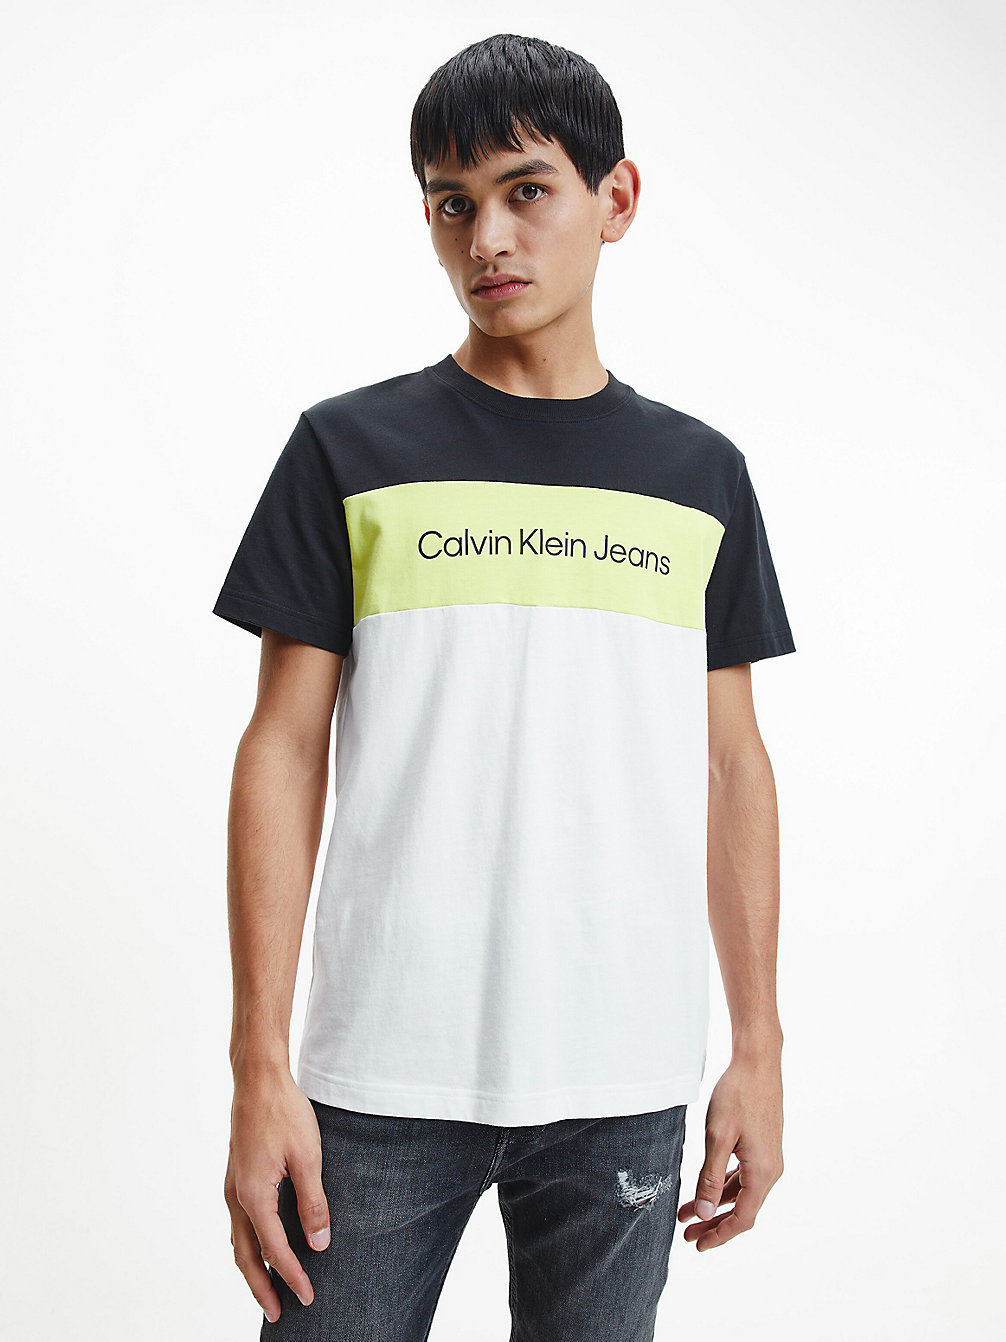 NEW IN CLOTHING for men | Calvin Klein® - Official Site